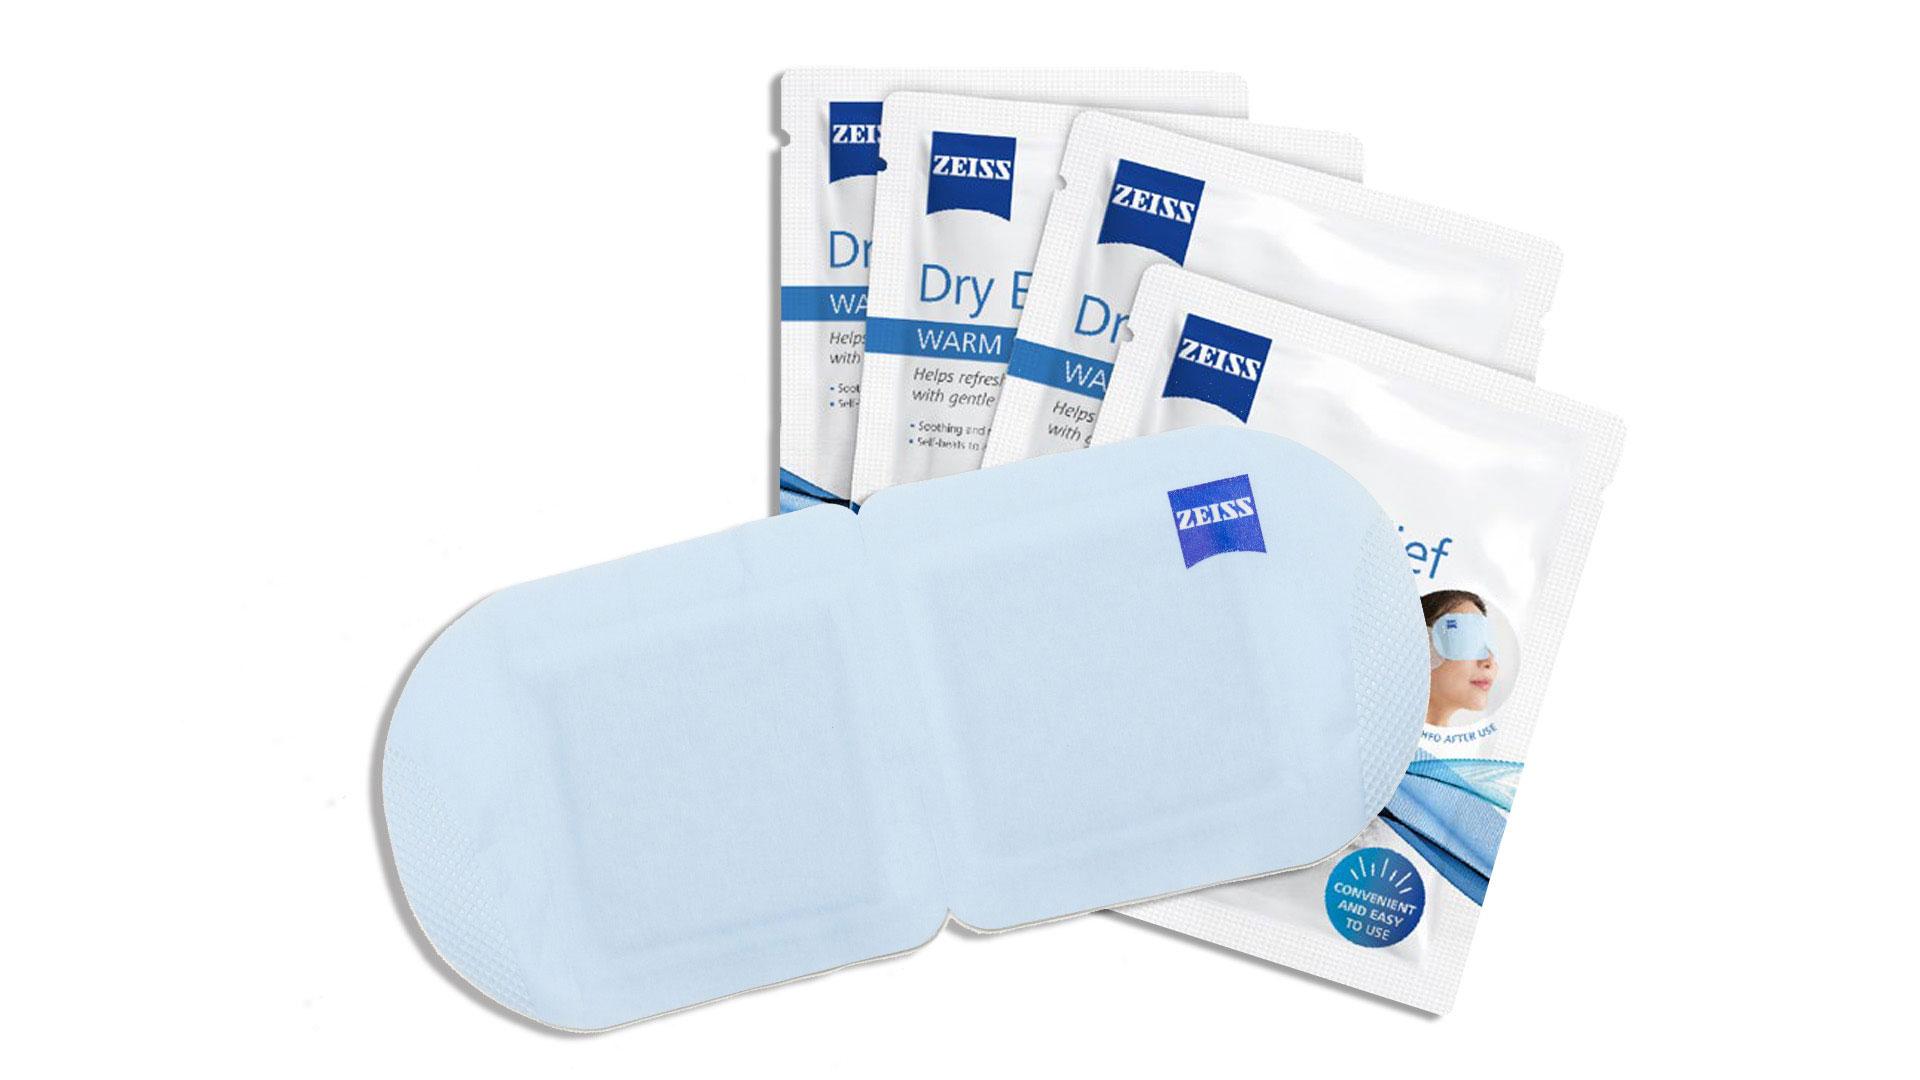 An image of ZEISS Warm Eye Mask and packaging.